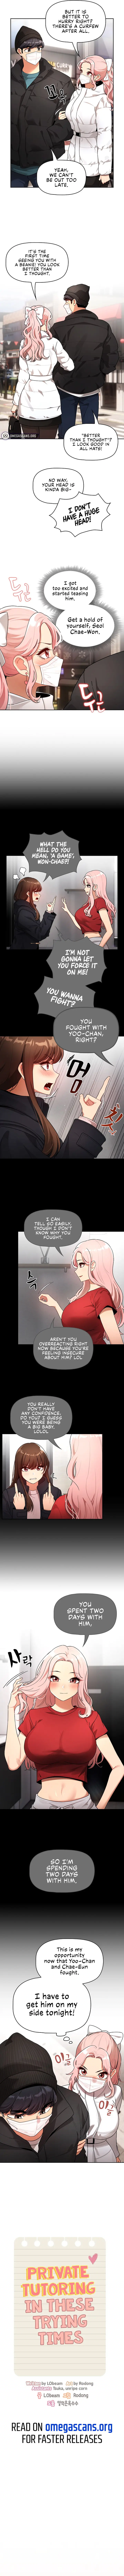 private-tutoring-in-these-trying-times-chap-87-2